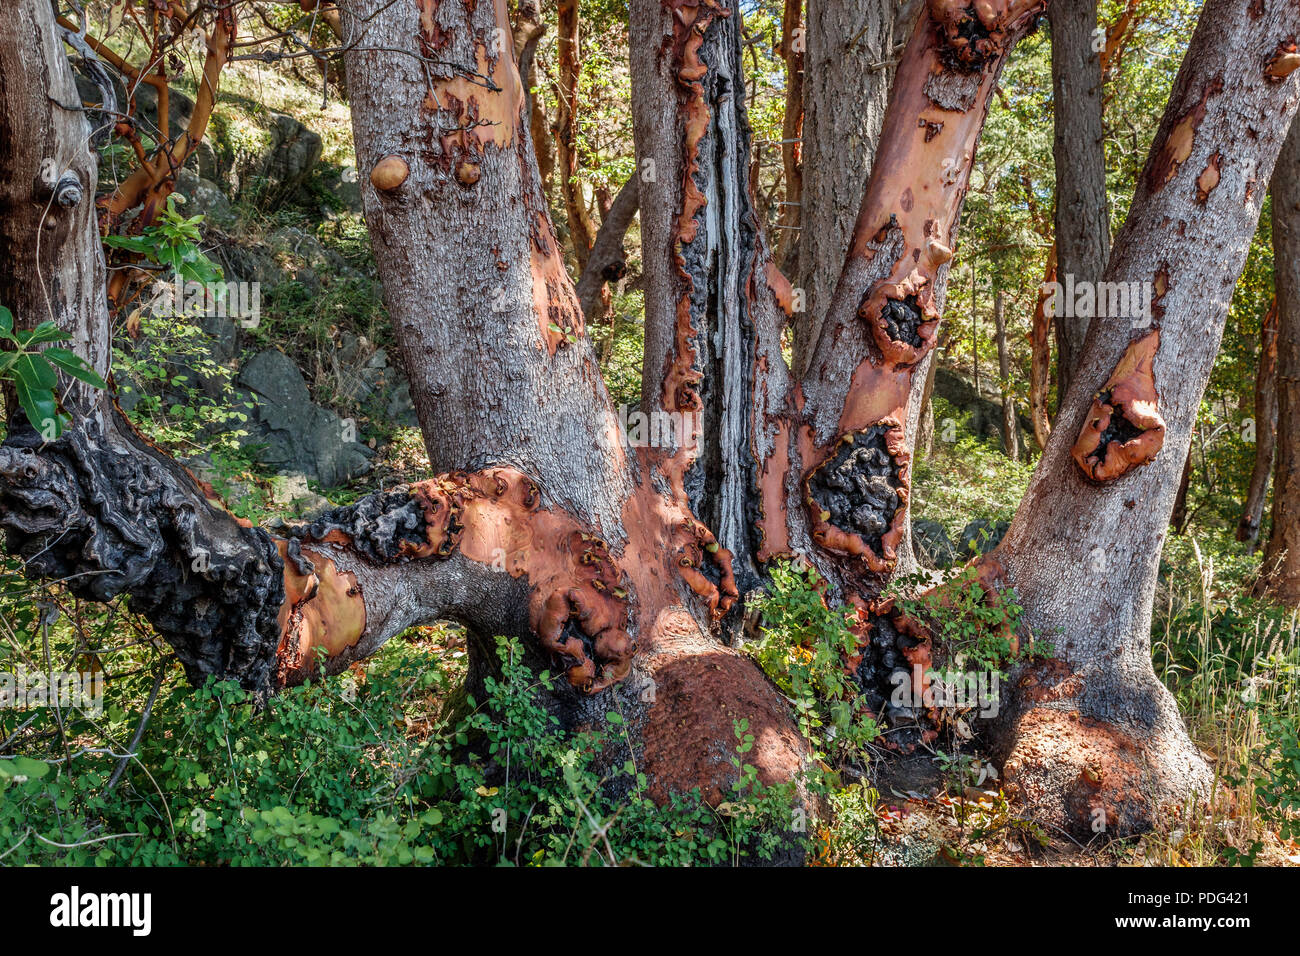 Sunlight and shadows fall on a cluster of arbutus trunks in a forest, with prominent cankers and irregular calluses likely from a a fungal disease. Stock Photo